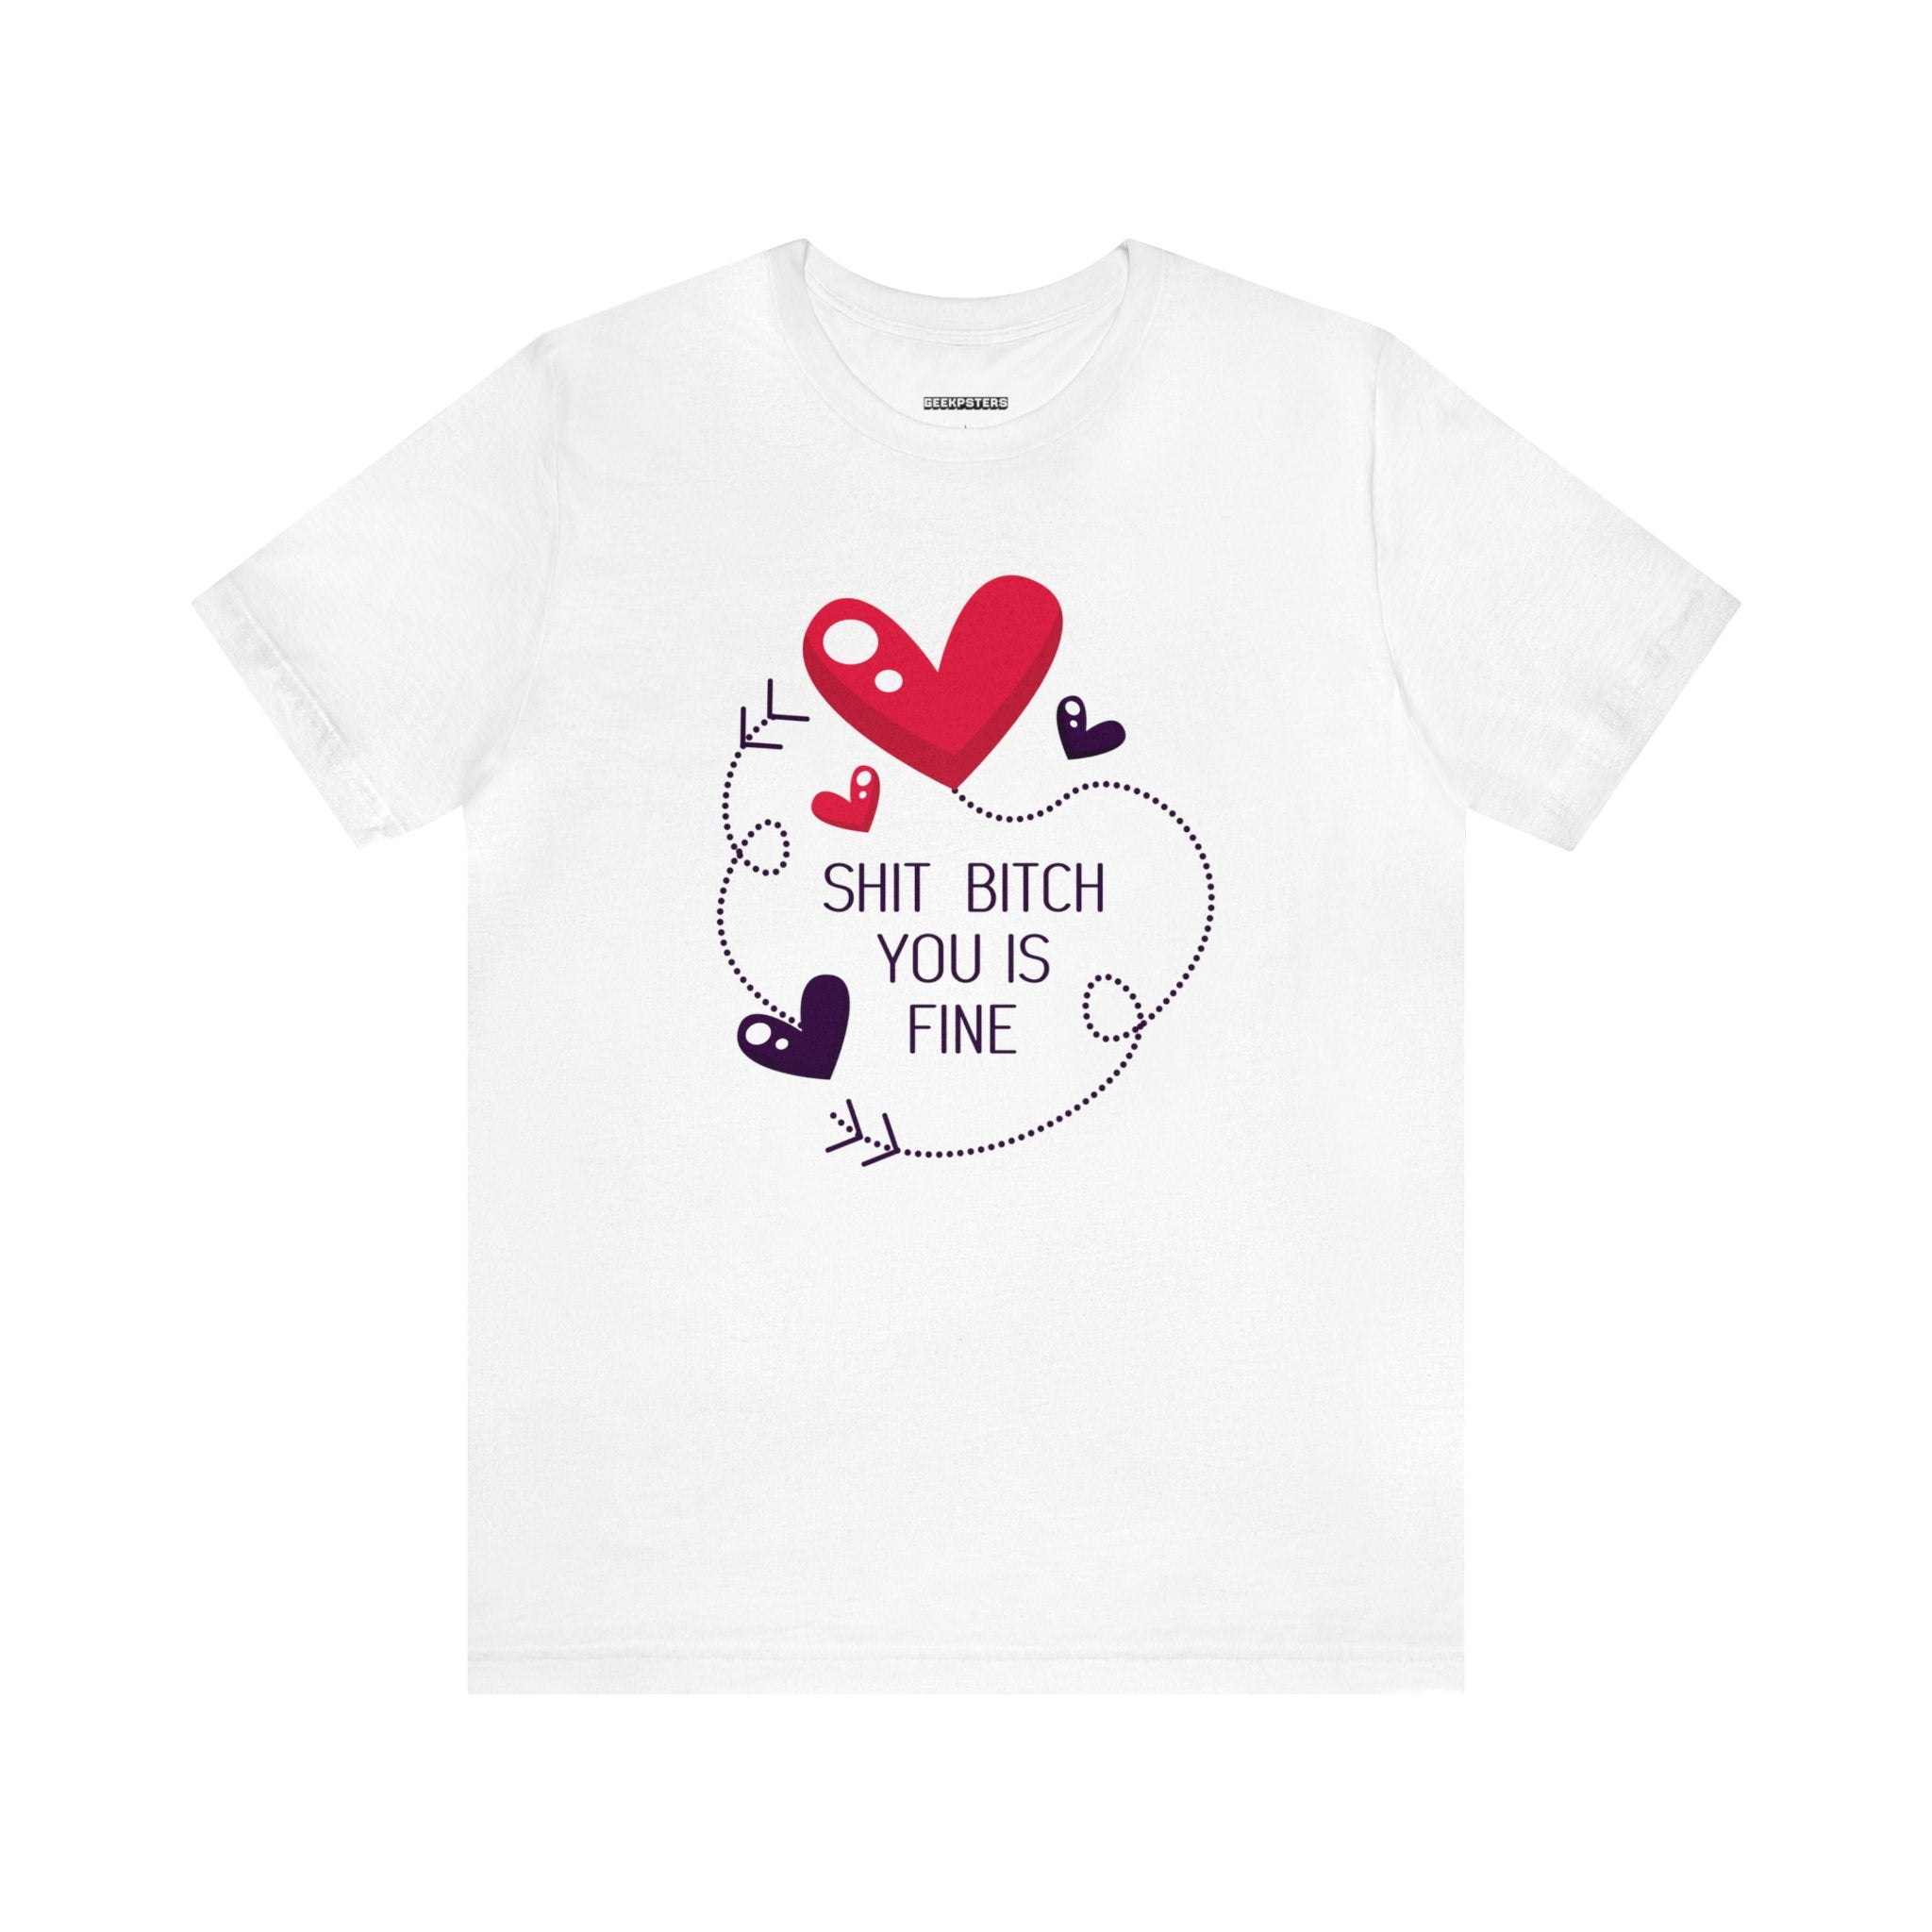 Order a You Is Fine T-Shirt with a heart and arrows today.